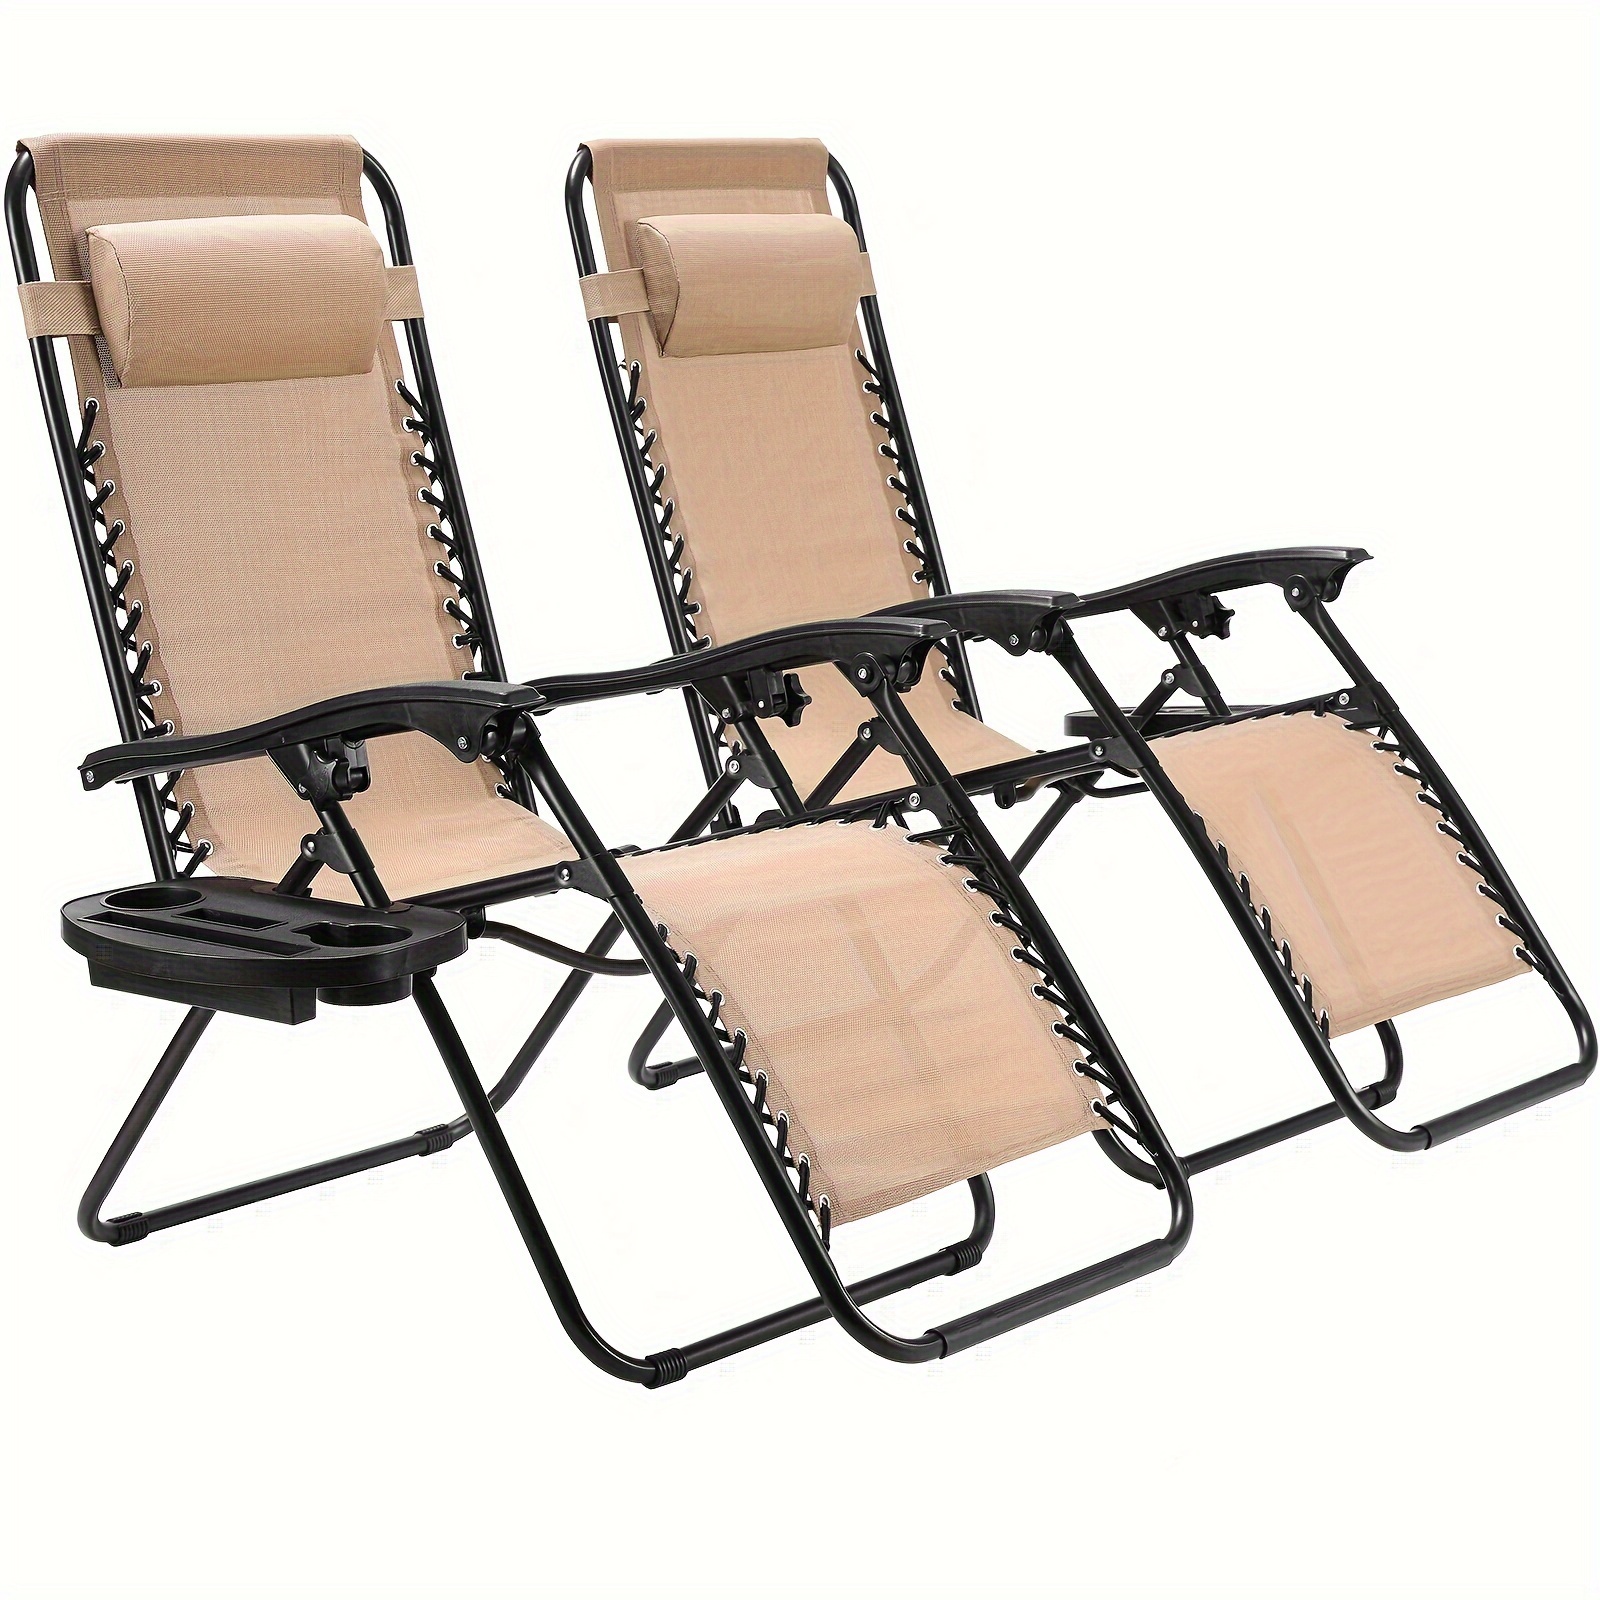 

Set Of 2 Sun Loungers, Foldable Lounge Chair With Adjustable Headrest And Backrest, Lunch Break Lounge Chair With Cup Holder, Ergonomic And Breathable, Beige